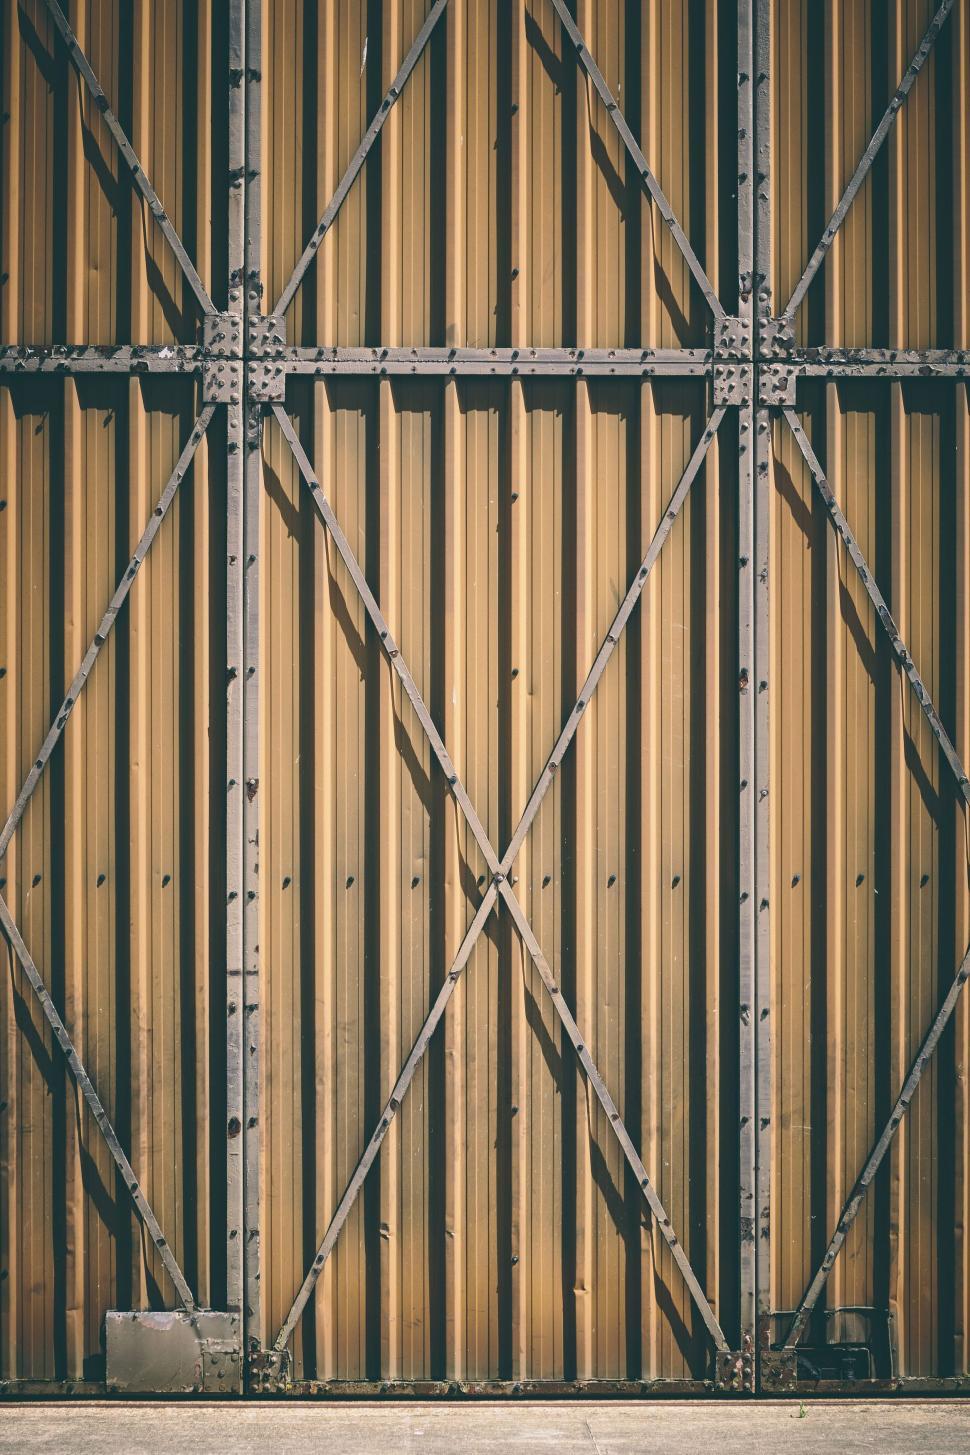 Free Image of Construction Site Gate  